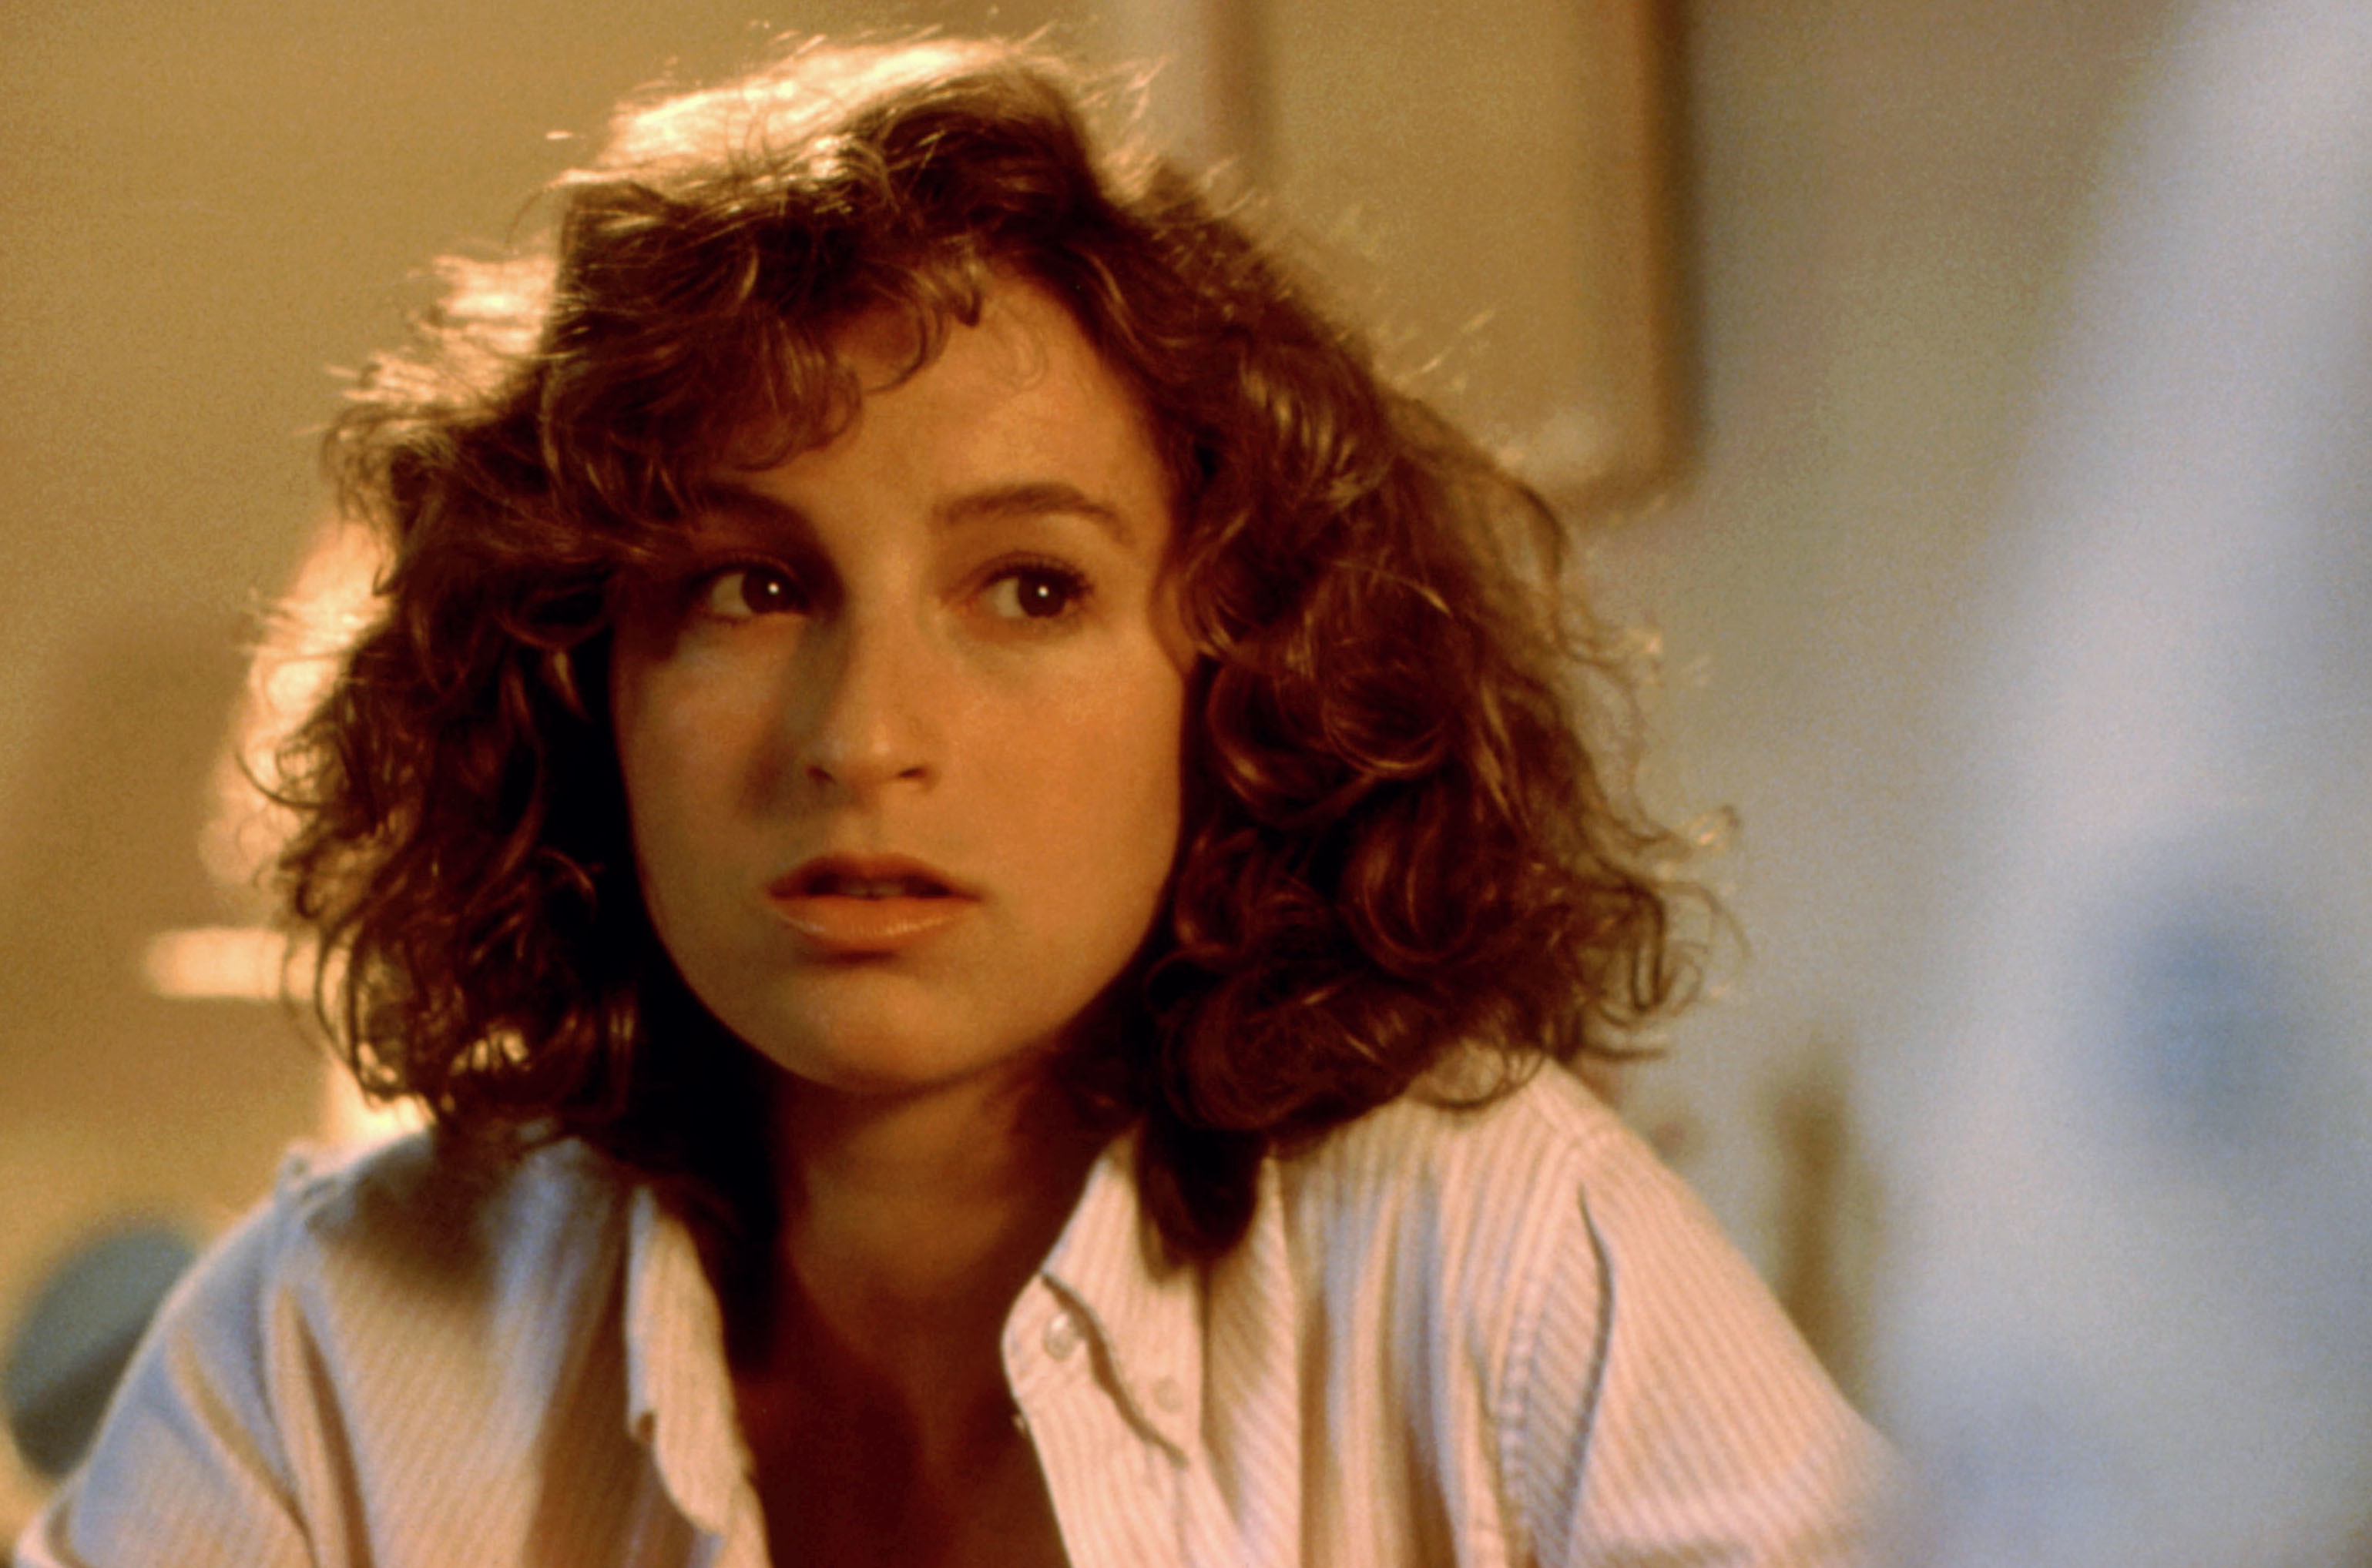 A young woman with curly hair looks to the side, appearing thoughtful. She wears a casual, partially-buttoned shirt